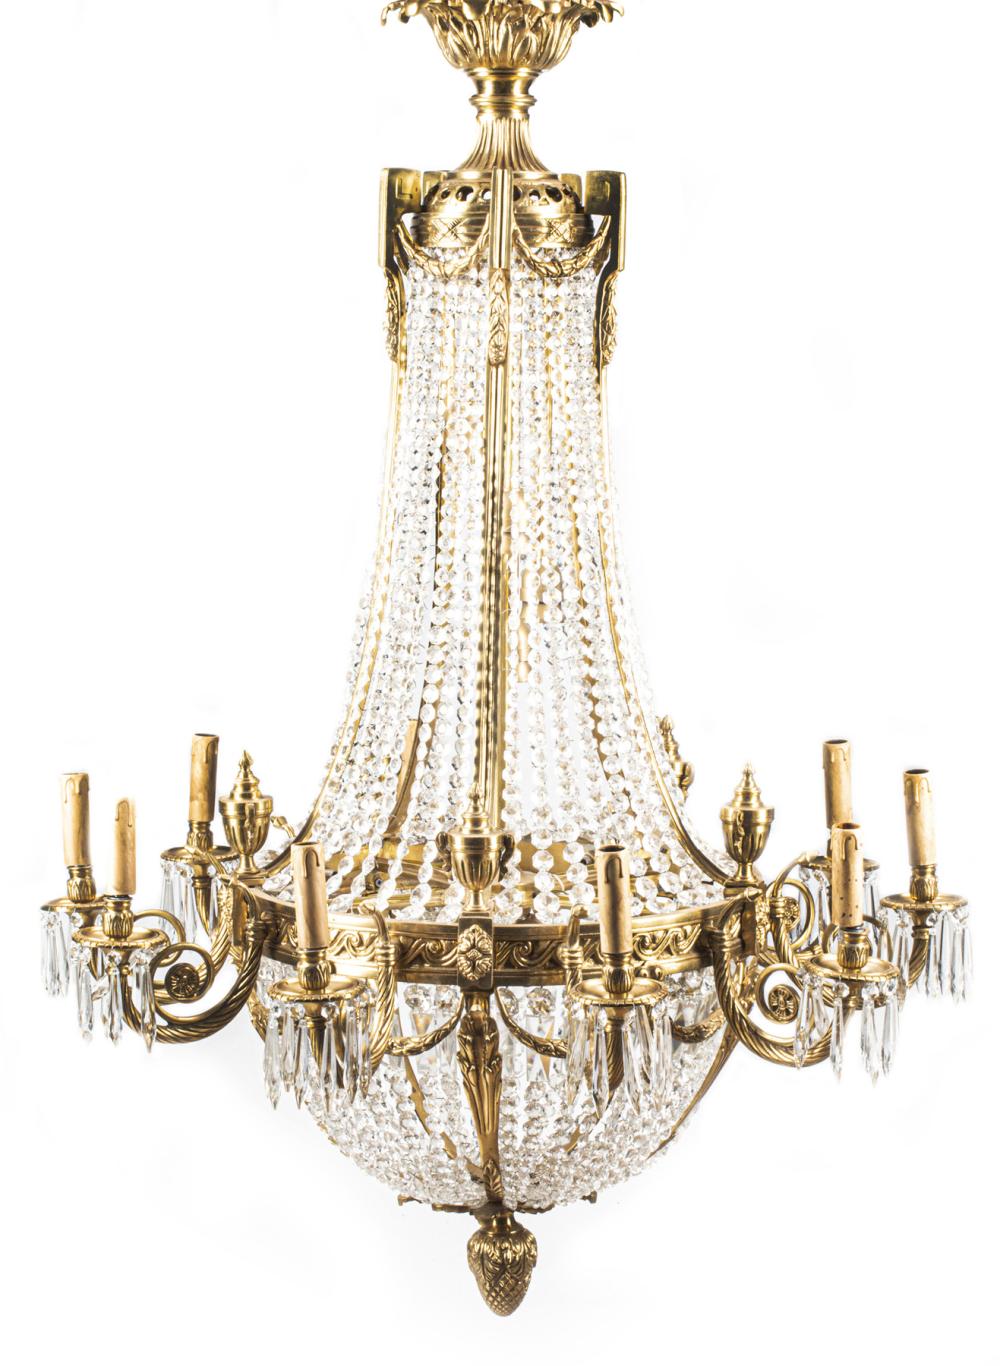 FRENCH BRONZE AND CRYSTAL TEN-LIGHT